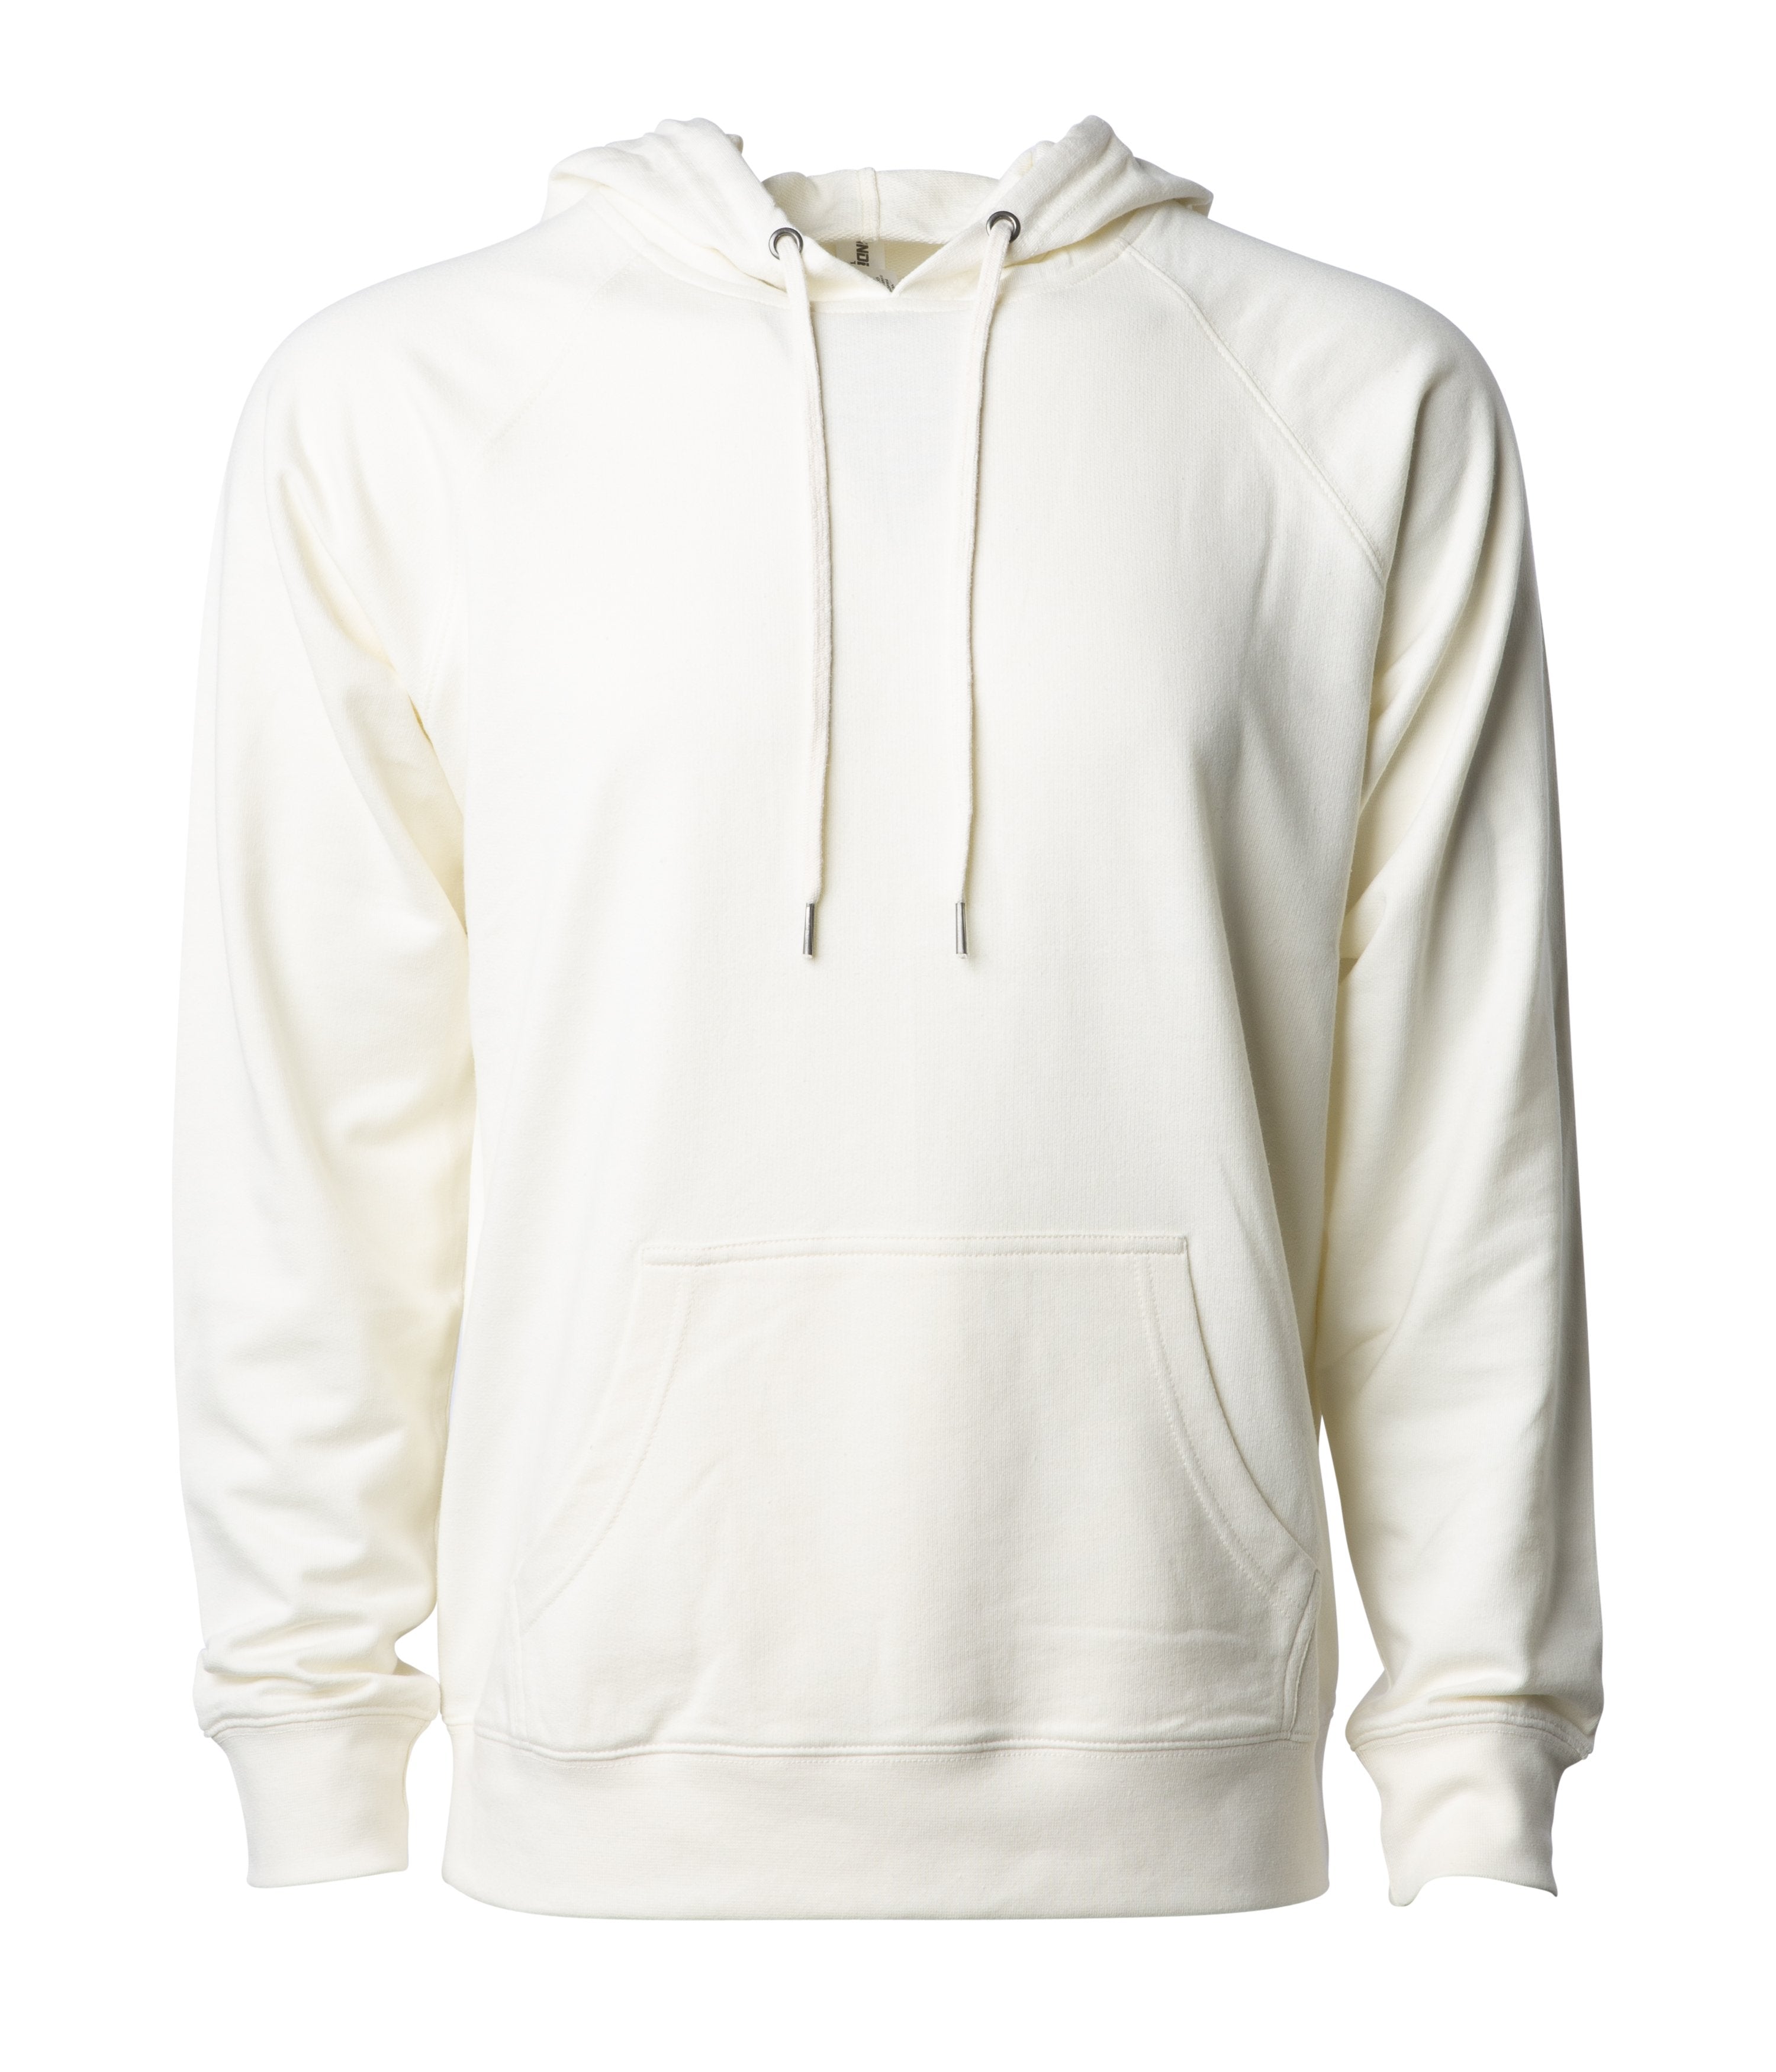 Unisex Lightweight Loopback Terry Hooded Pullover